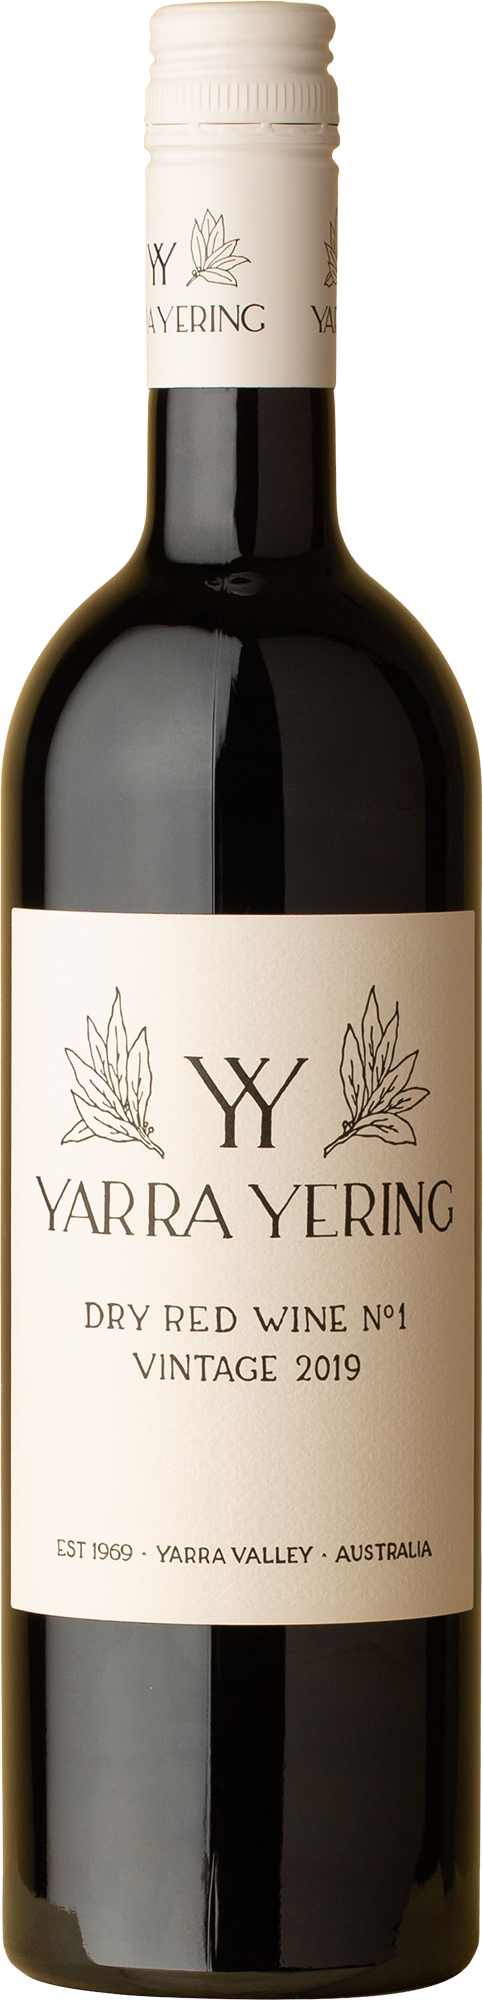 Yarra Yering - Dry Red No.1 Red Blend 2019